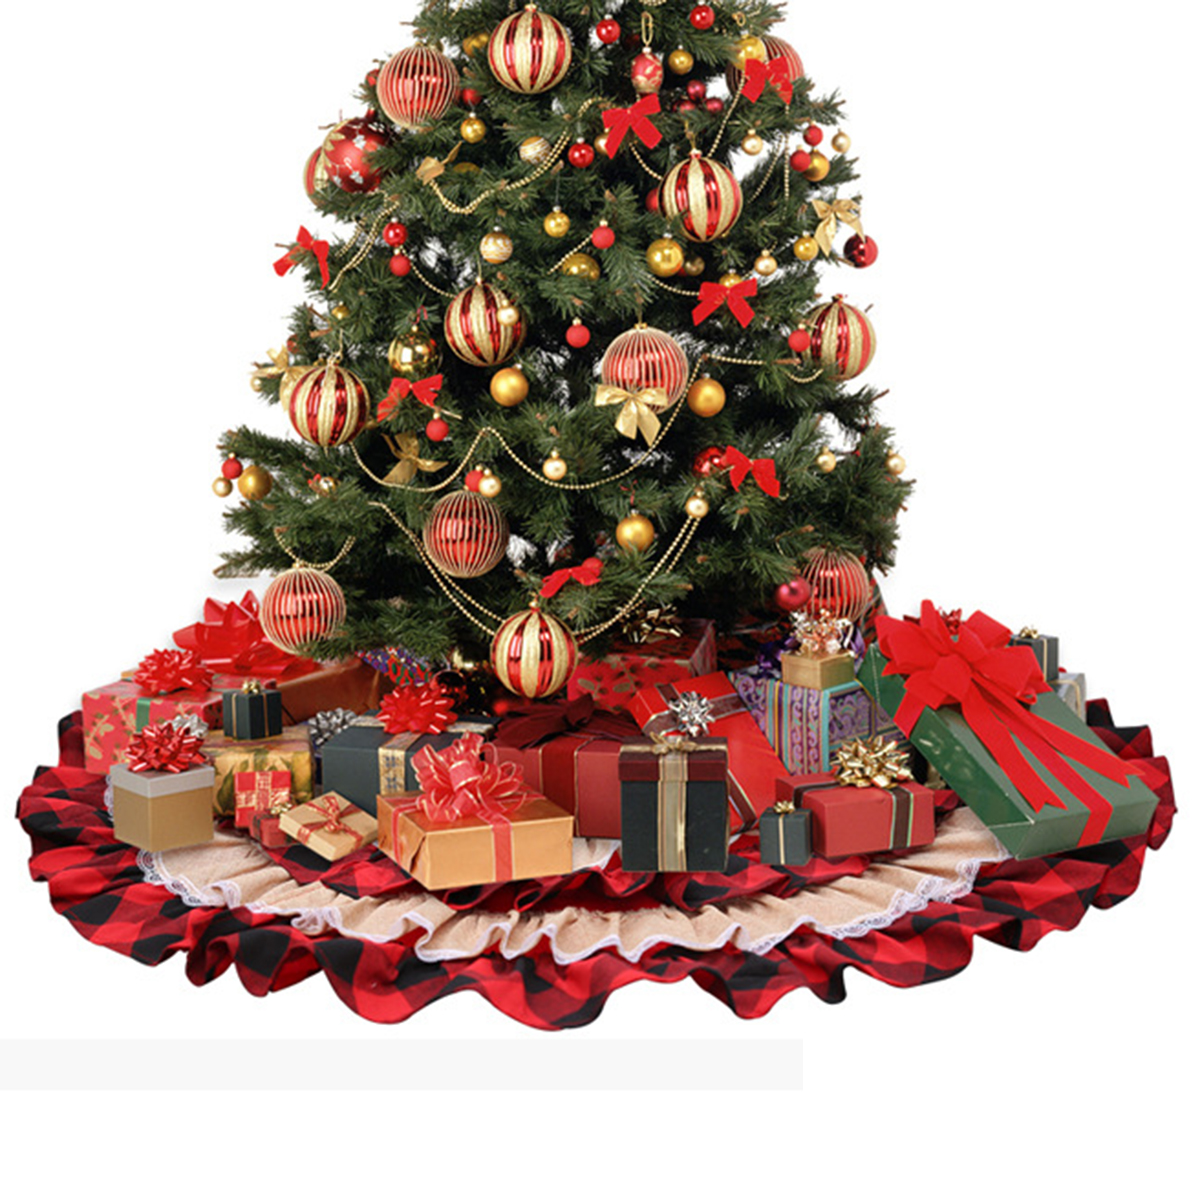 2020-Christmas-Tree-Skirts-Red-Cake-Plaid-Lace-Carpet-Round-Linen-Apron-New-Year-Blanket-Home-Partie-1770964-7